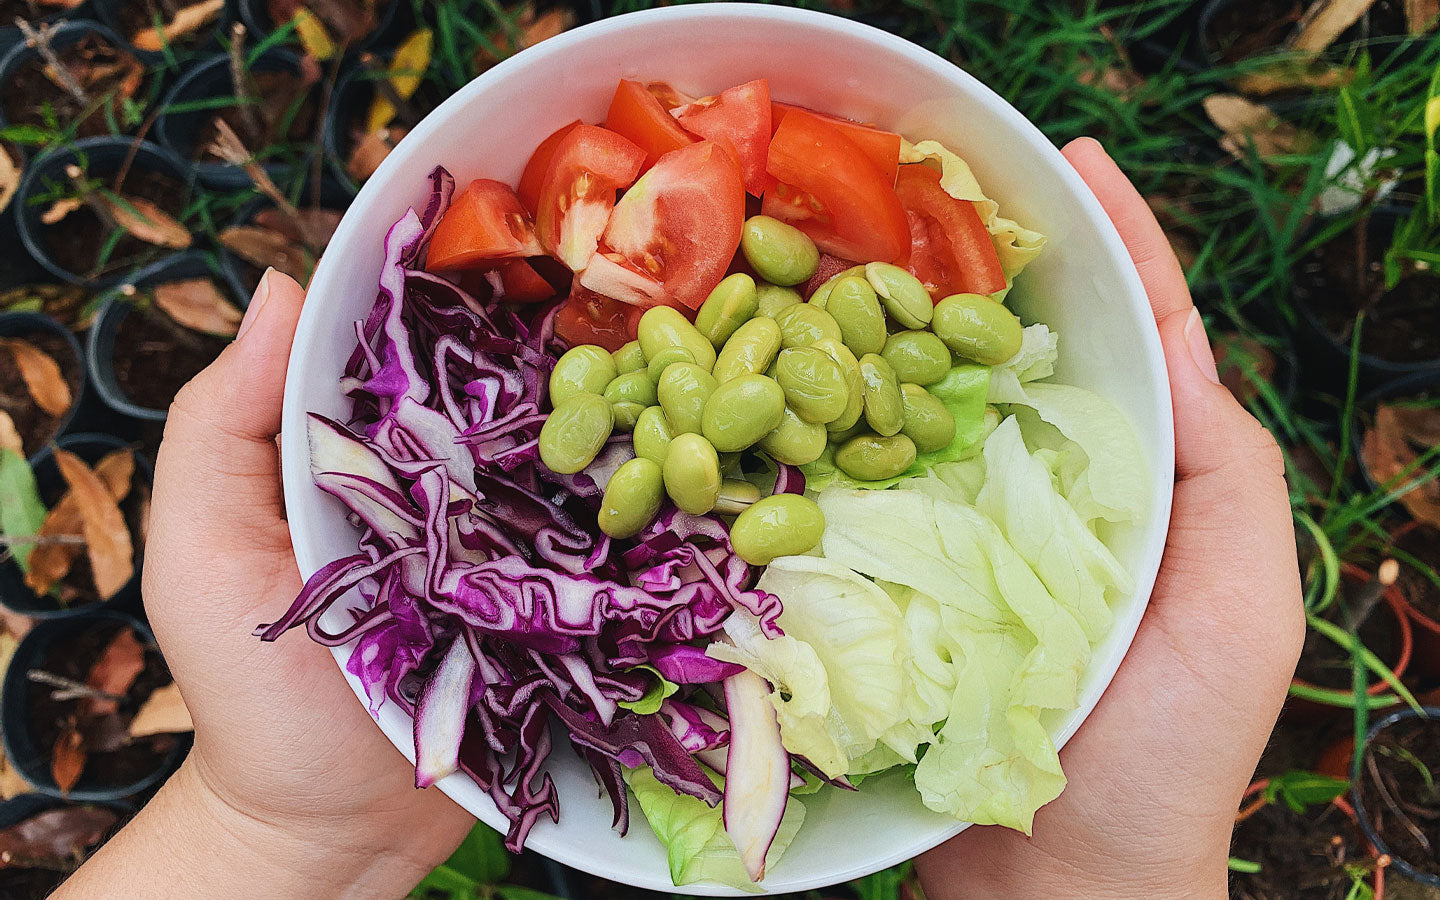 A person holds a bowl of fresh vegetables, like tomatoes, lettuce, cabbage, and lima beans.